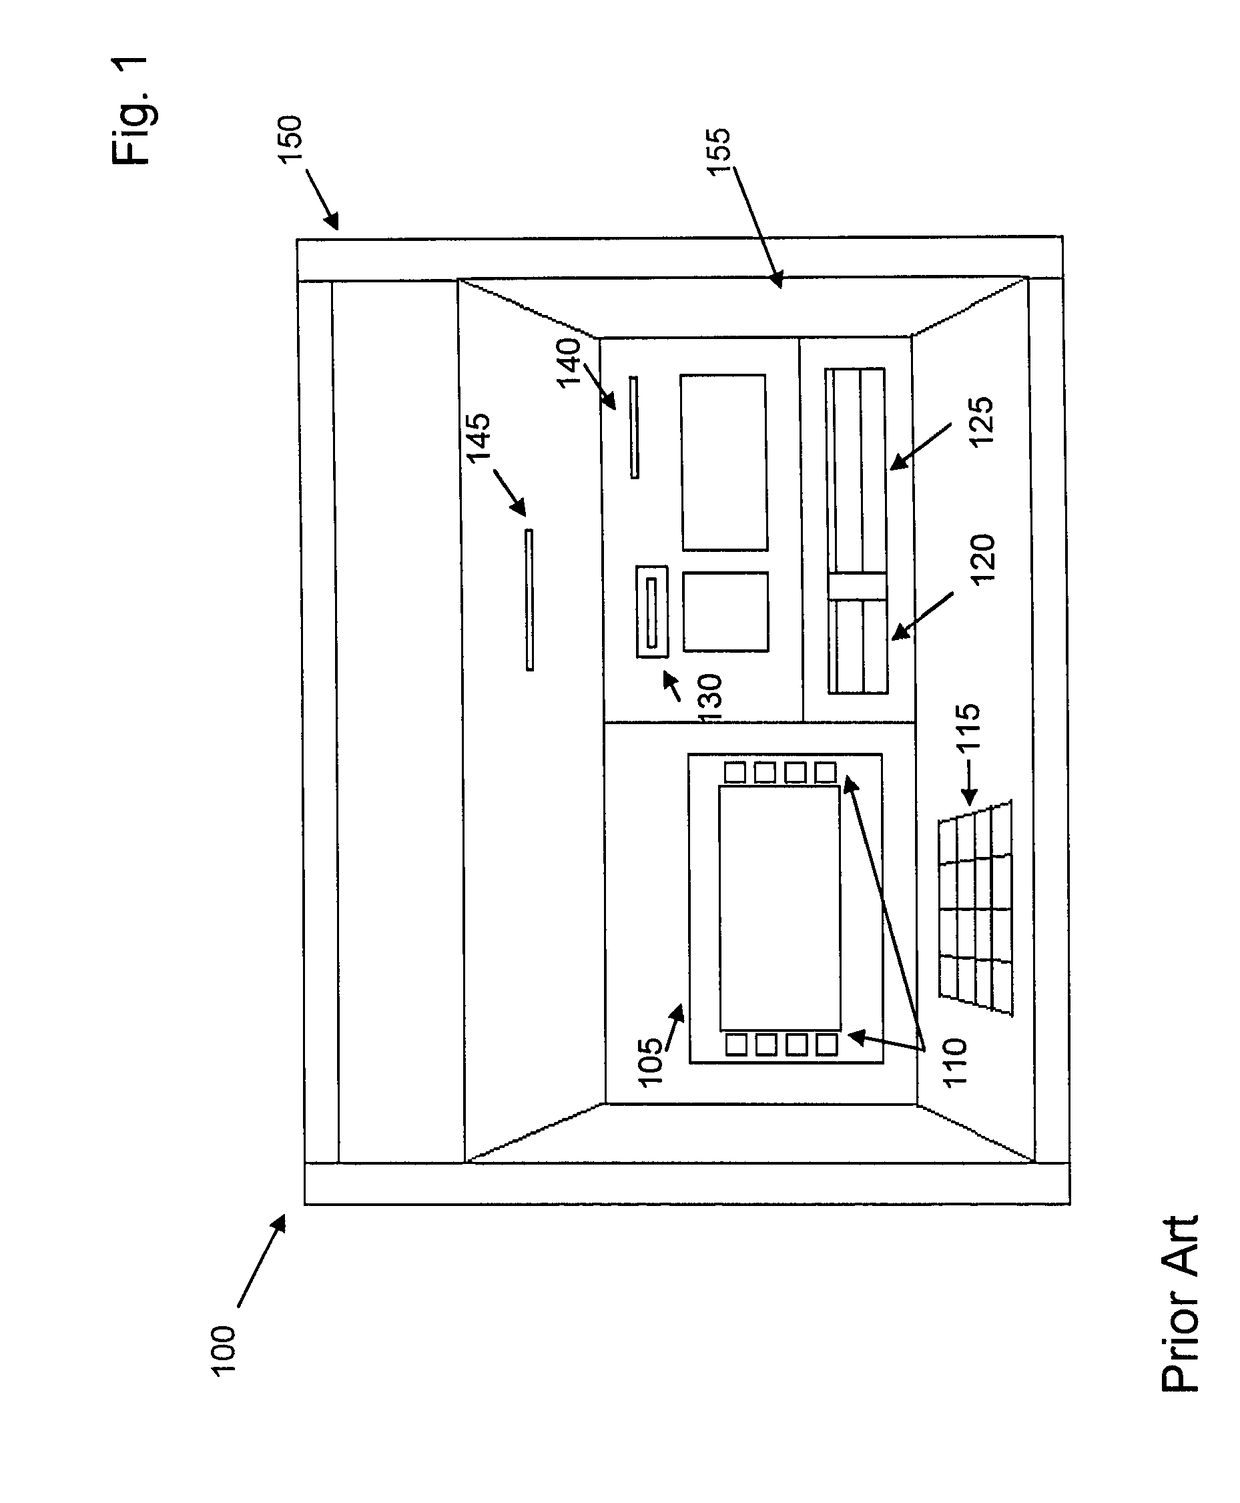 Security apparatus for an automated teller machine